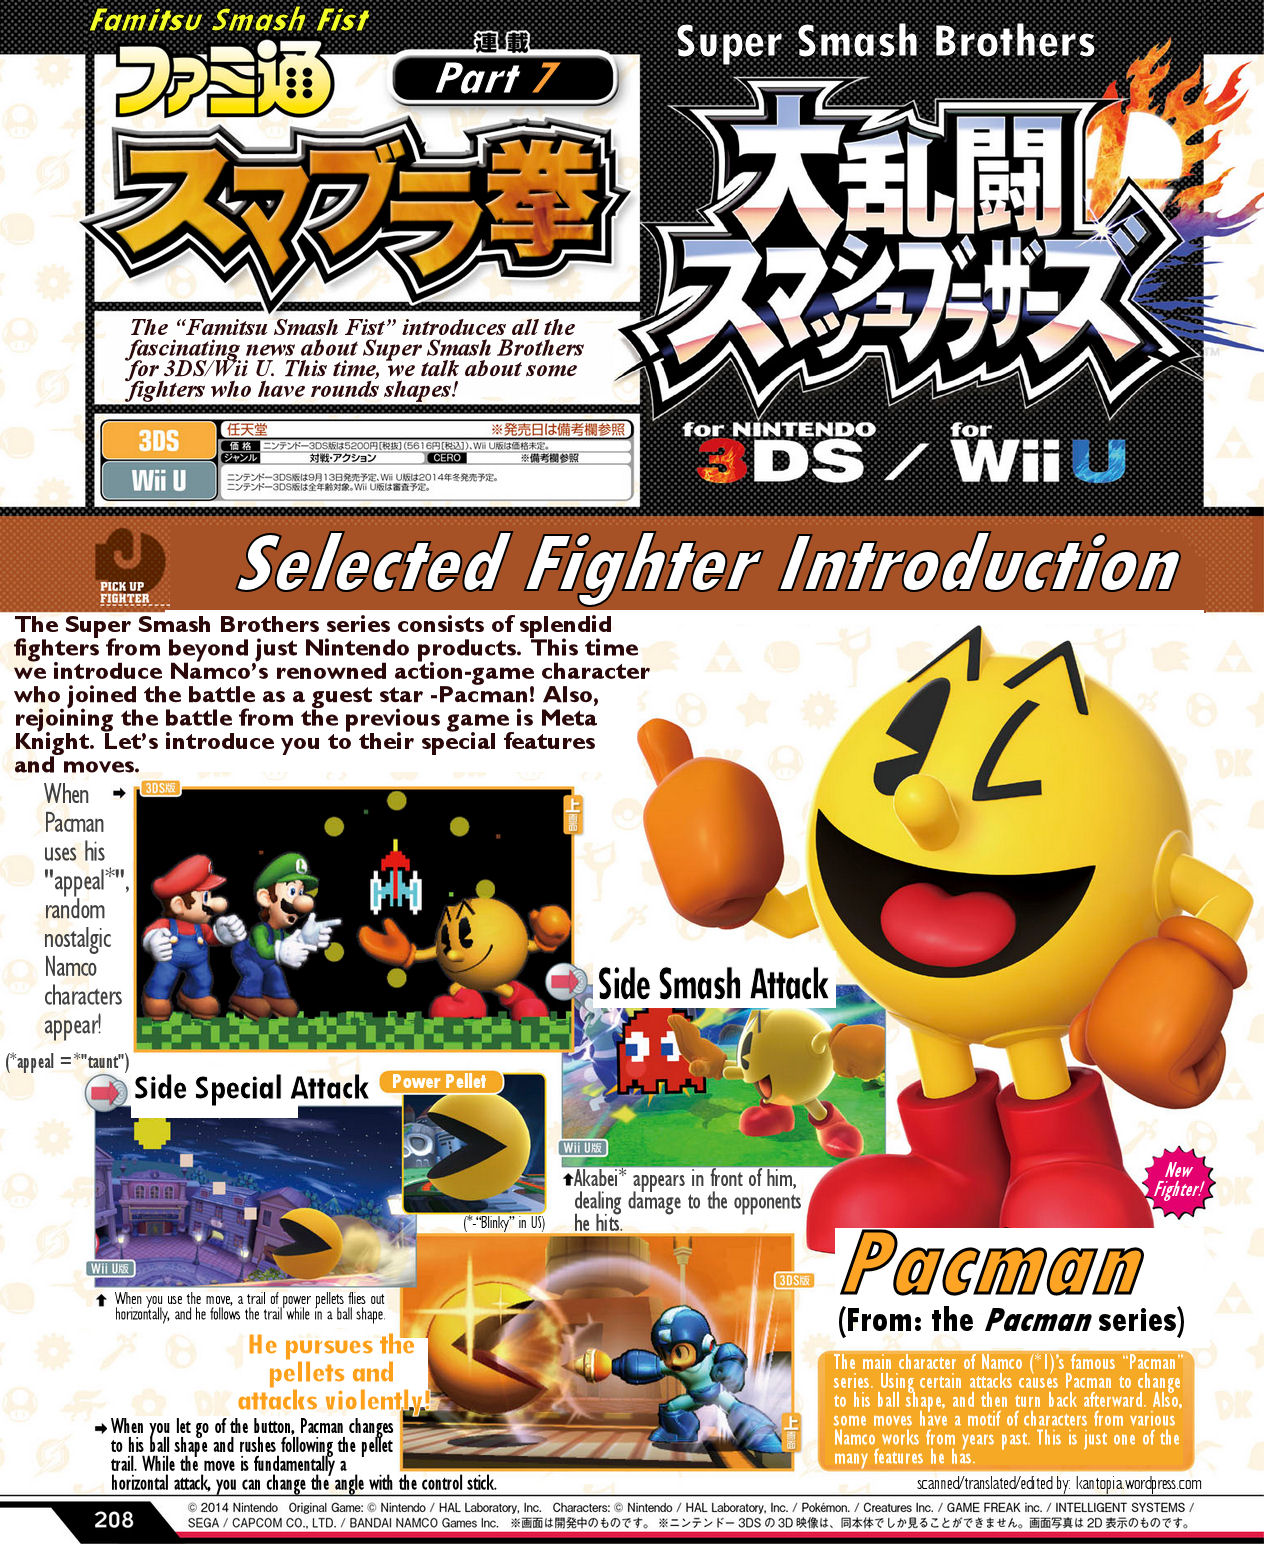 Super Smash Bros Wii U/3DS Discussion (NEW) - Page 9 Page208translate